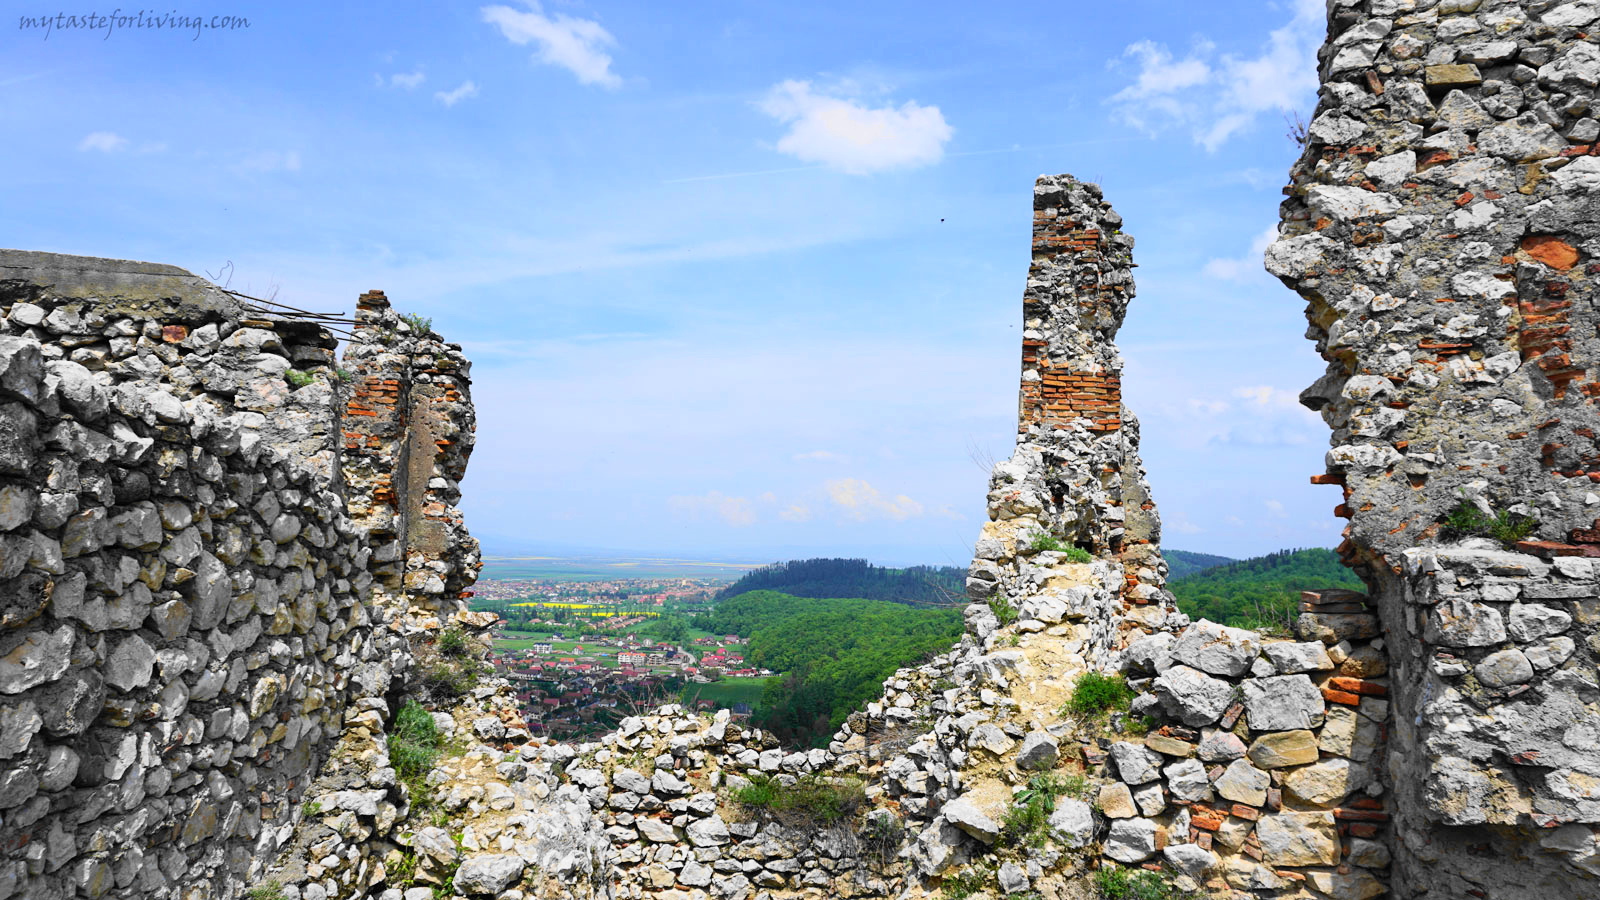 Located near Brasov, 200 meters above the town of Rasnov, on the top of a rocky hill, the Rasnov fortress is one of the most visited medieval attractions in Romania.